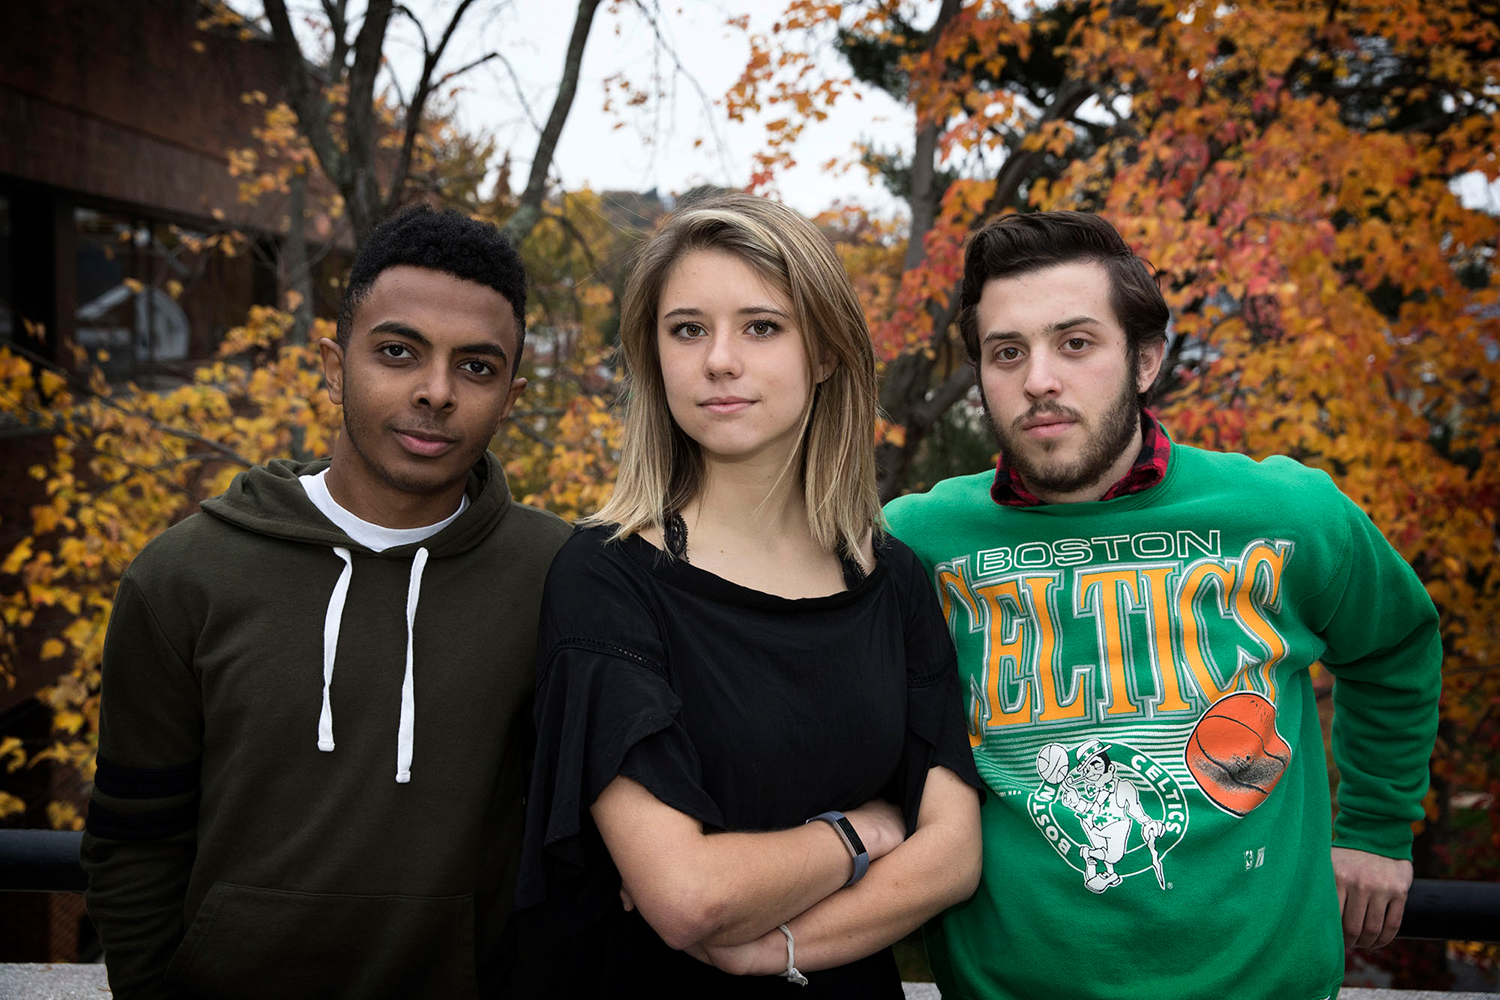 From left, Alazar Aklilu, Emily Dhue and Joshua Palmer stand together looking at the camera